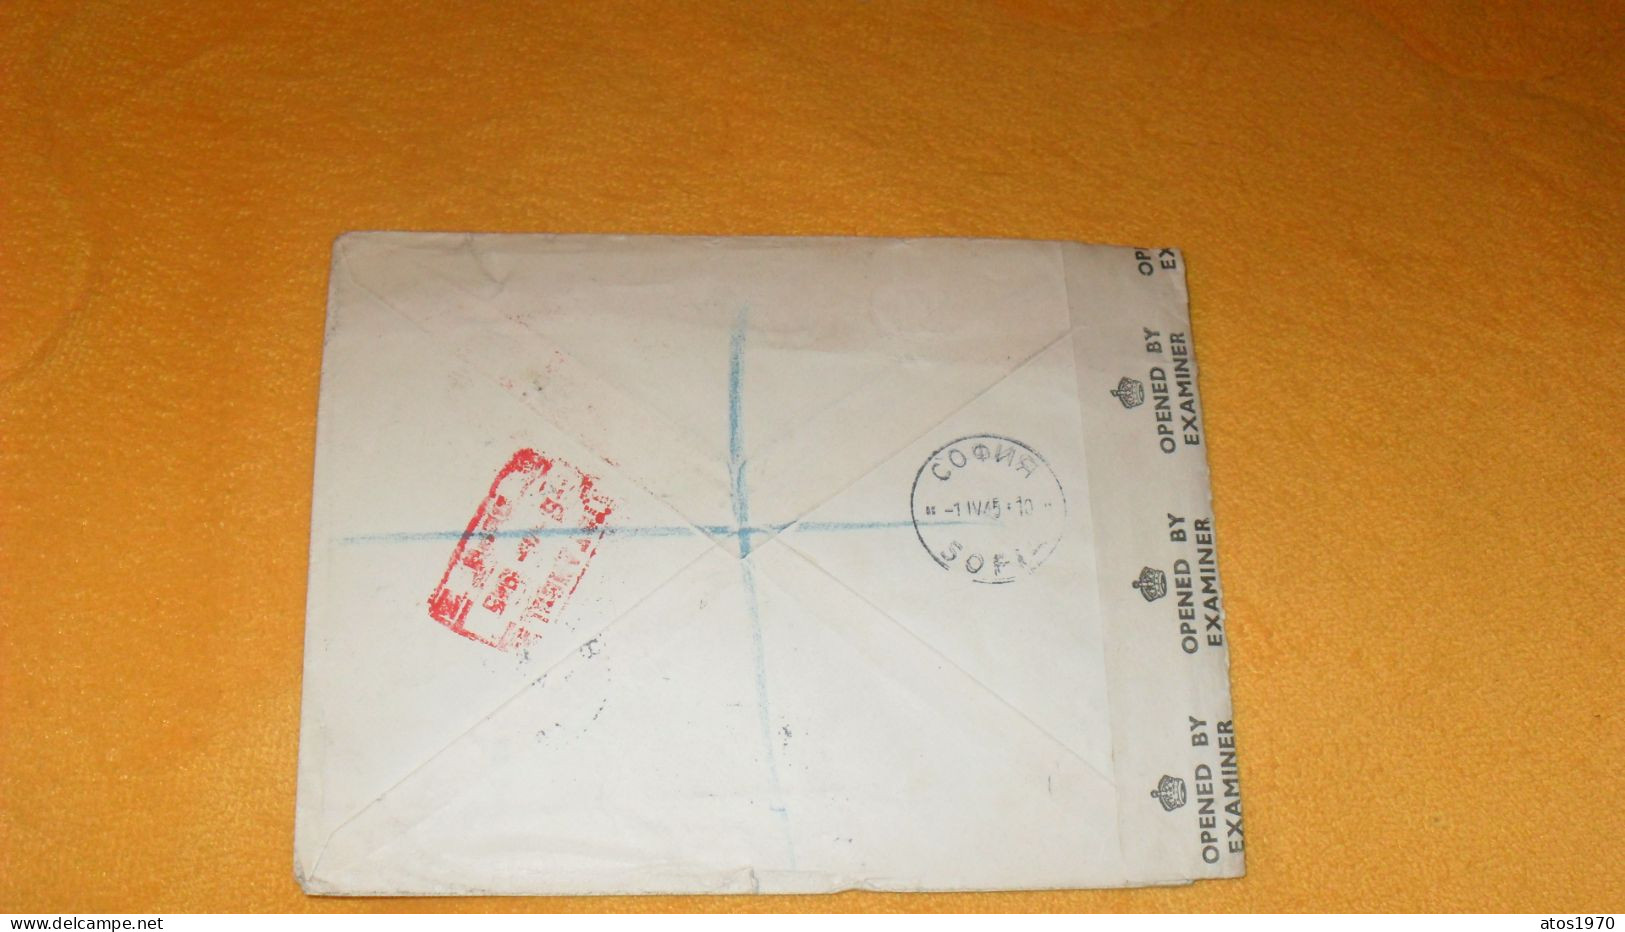 ENVELOPPE ANCIENNE DE 1945../ GEORGES T. PETROFF & CIE IMPORTATION...VARNA BULGARIE OPENED BY EXA..CACHETS + TIMBRES X3 - Covers & Documents